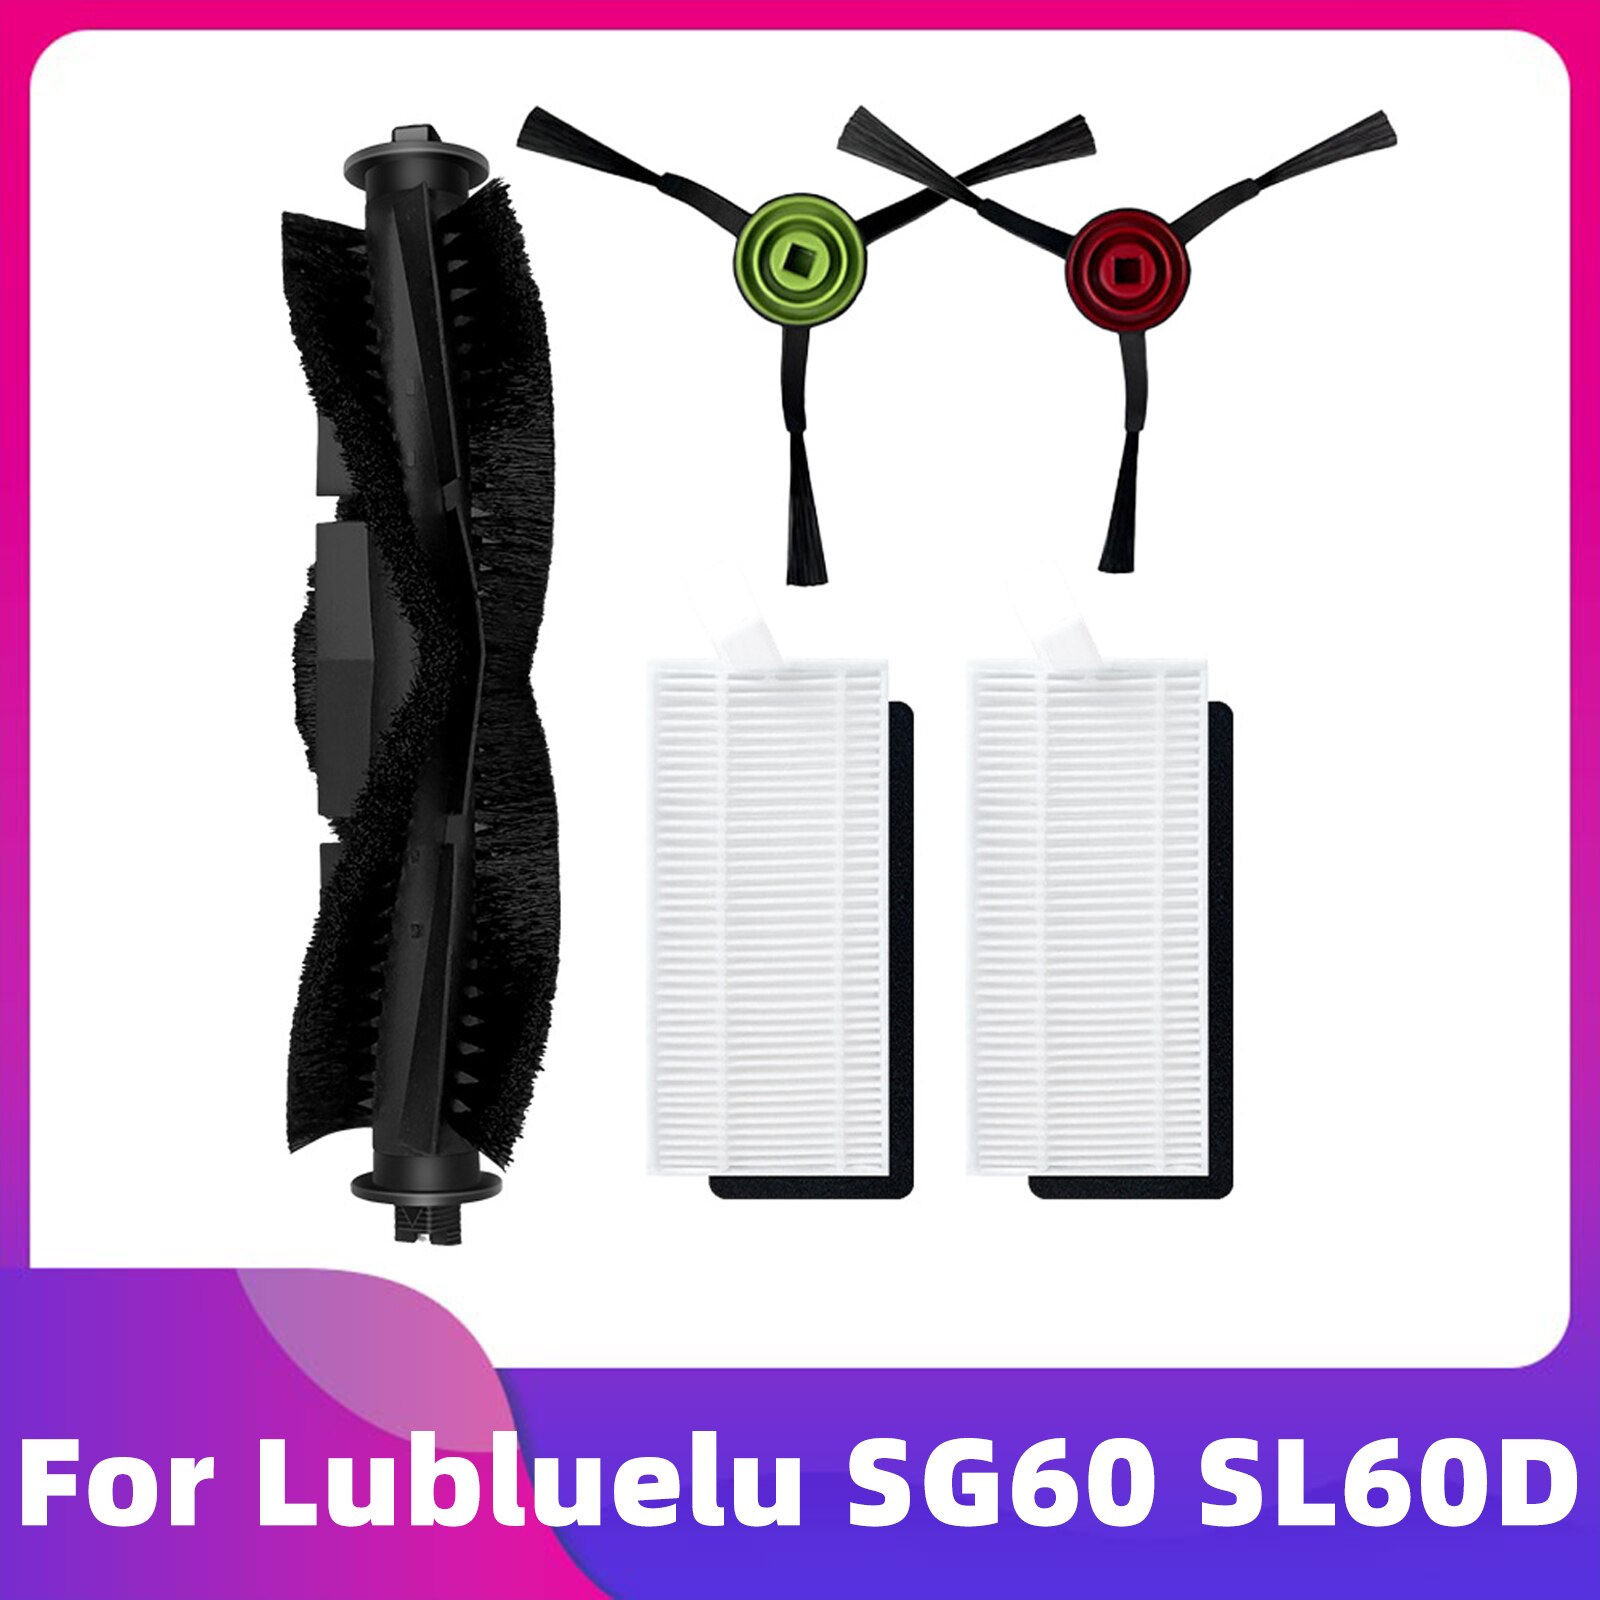 UPGRADE YOUR FOR Lubluelu SG60 Vacuum Cleaner with High Quality